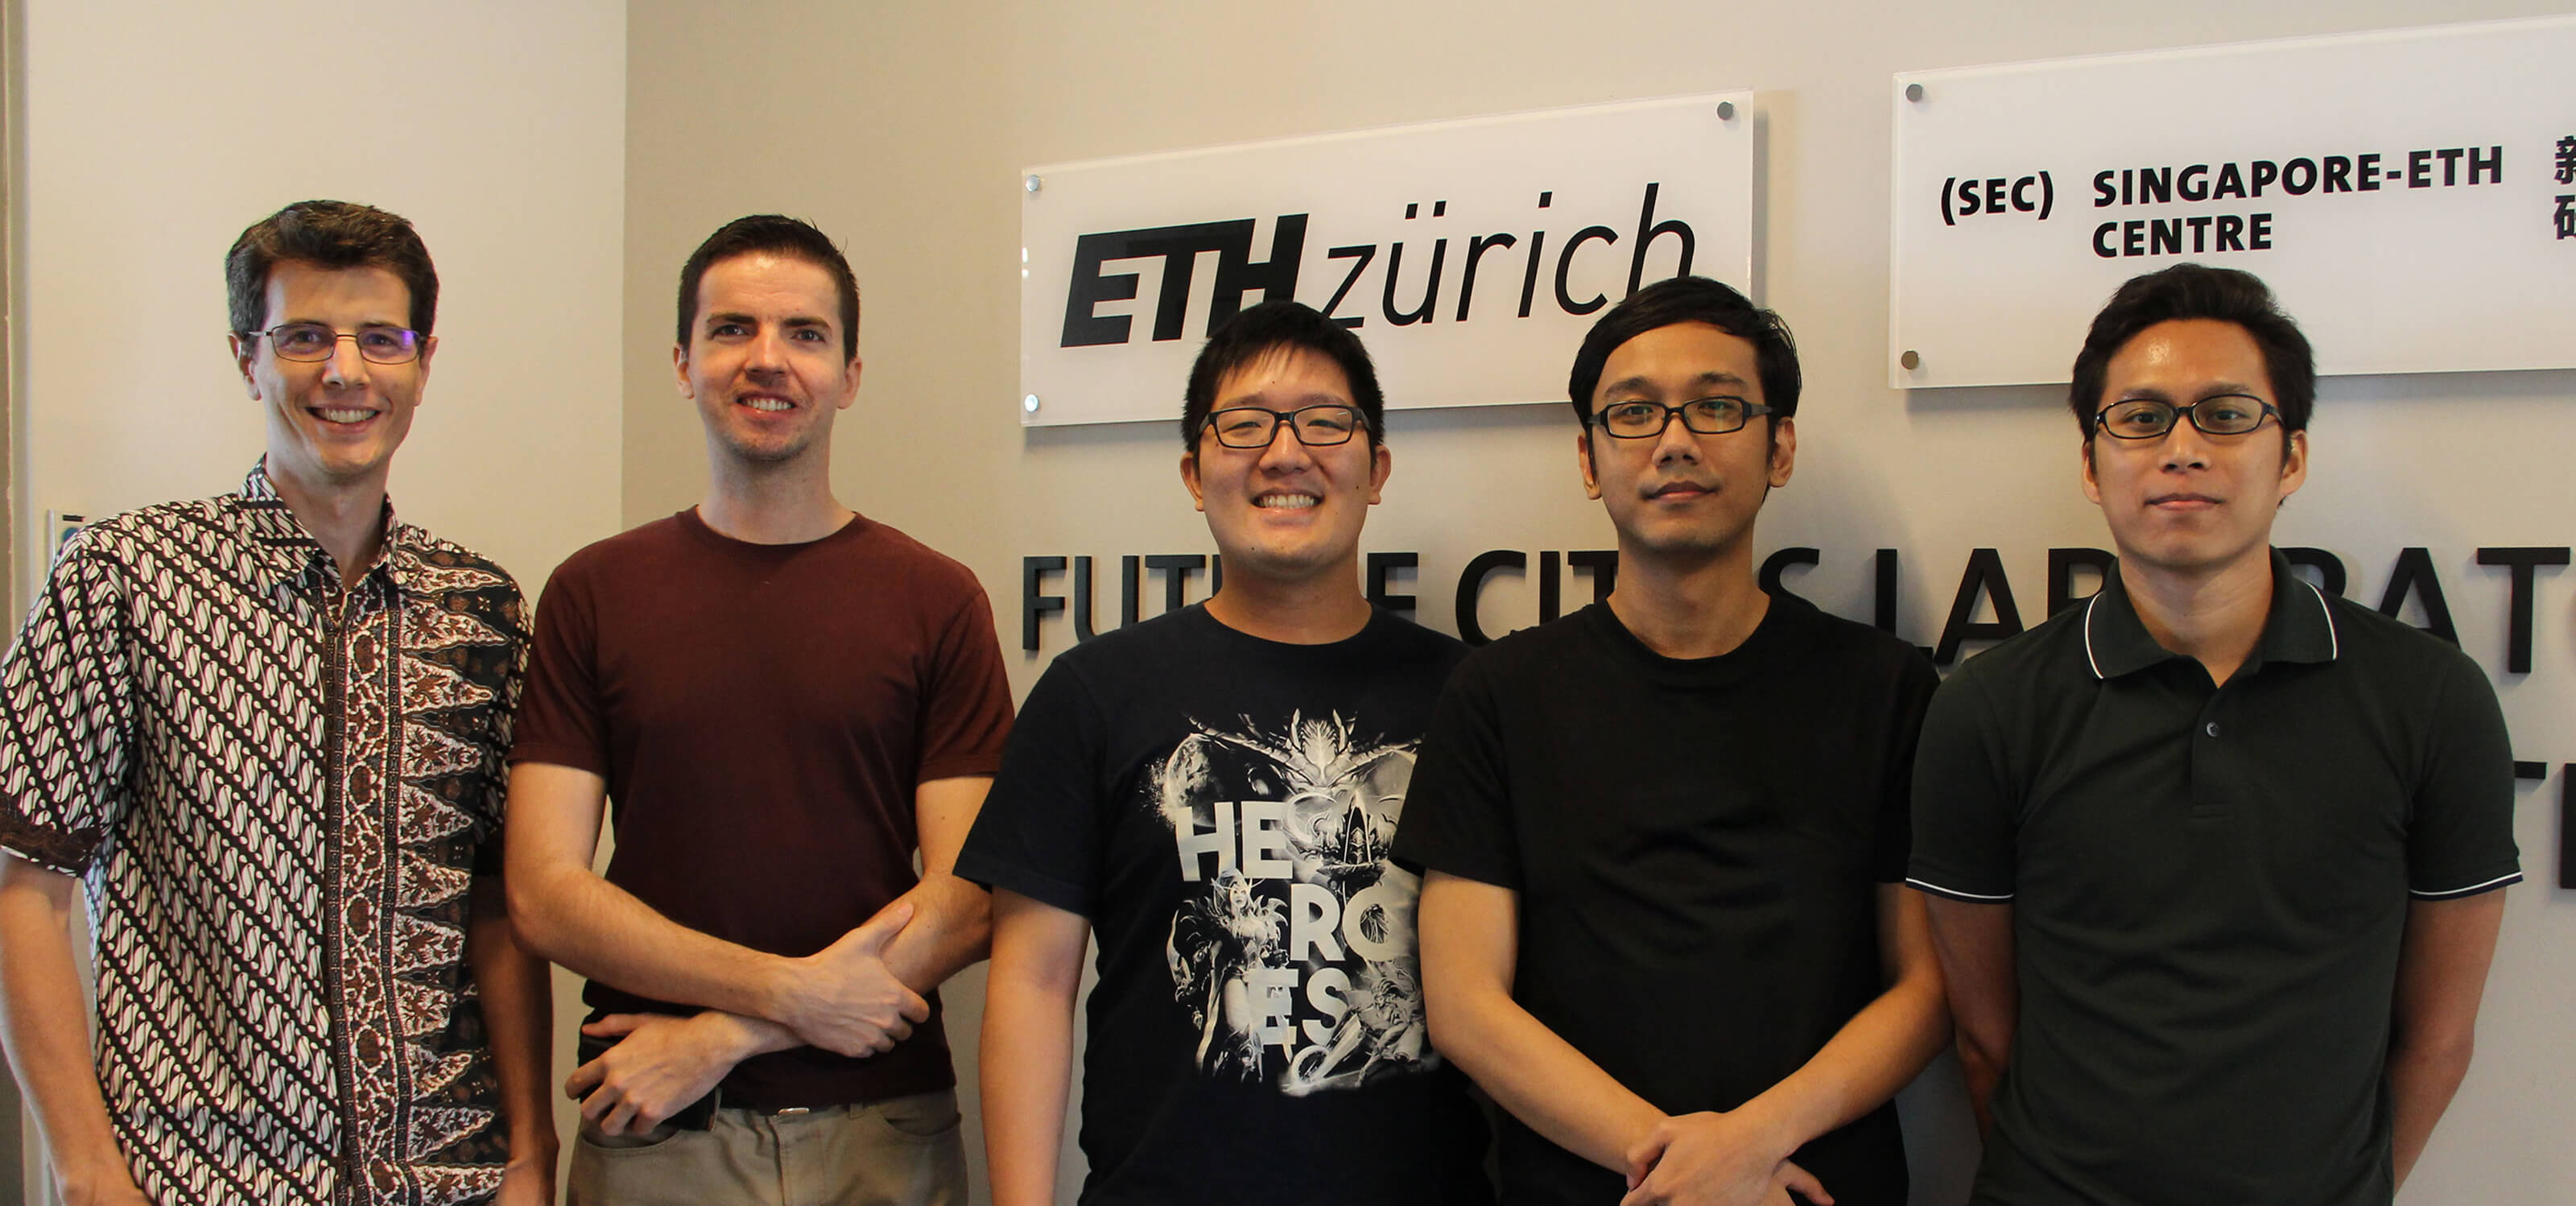 Group photo of five people at the Singapore-ETH Centre.